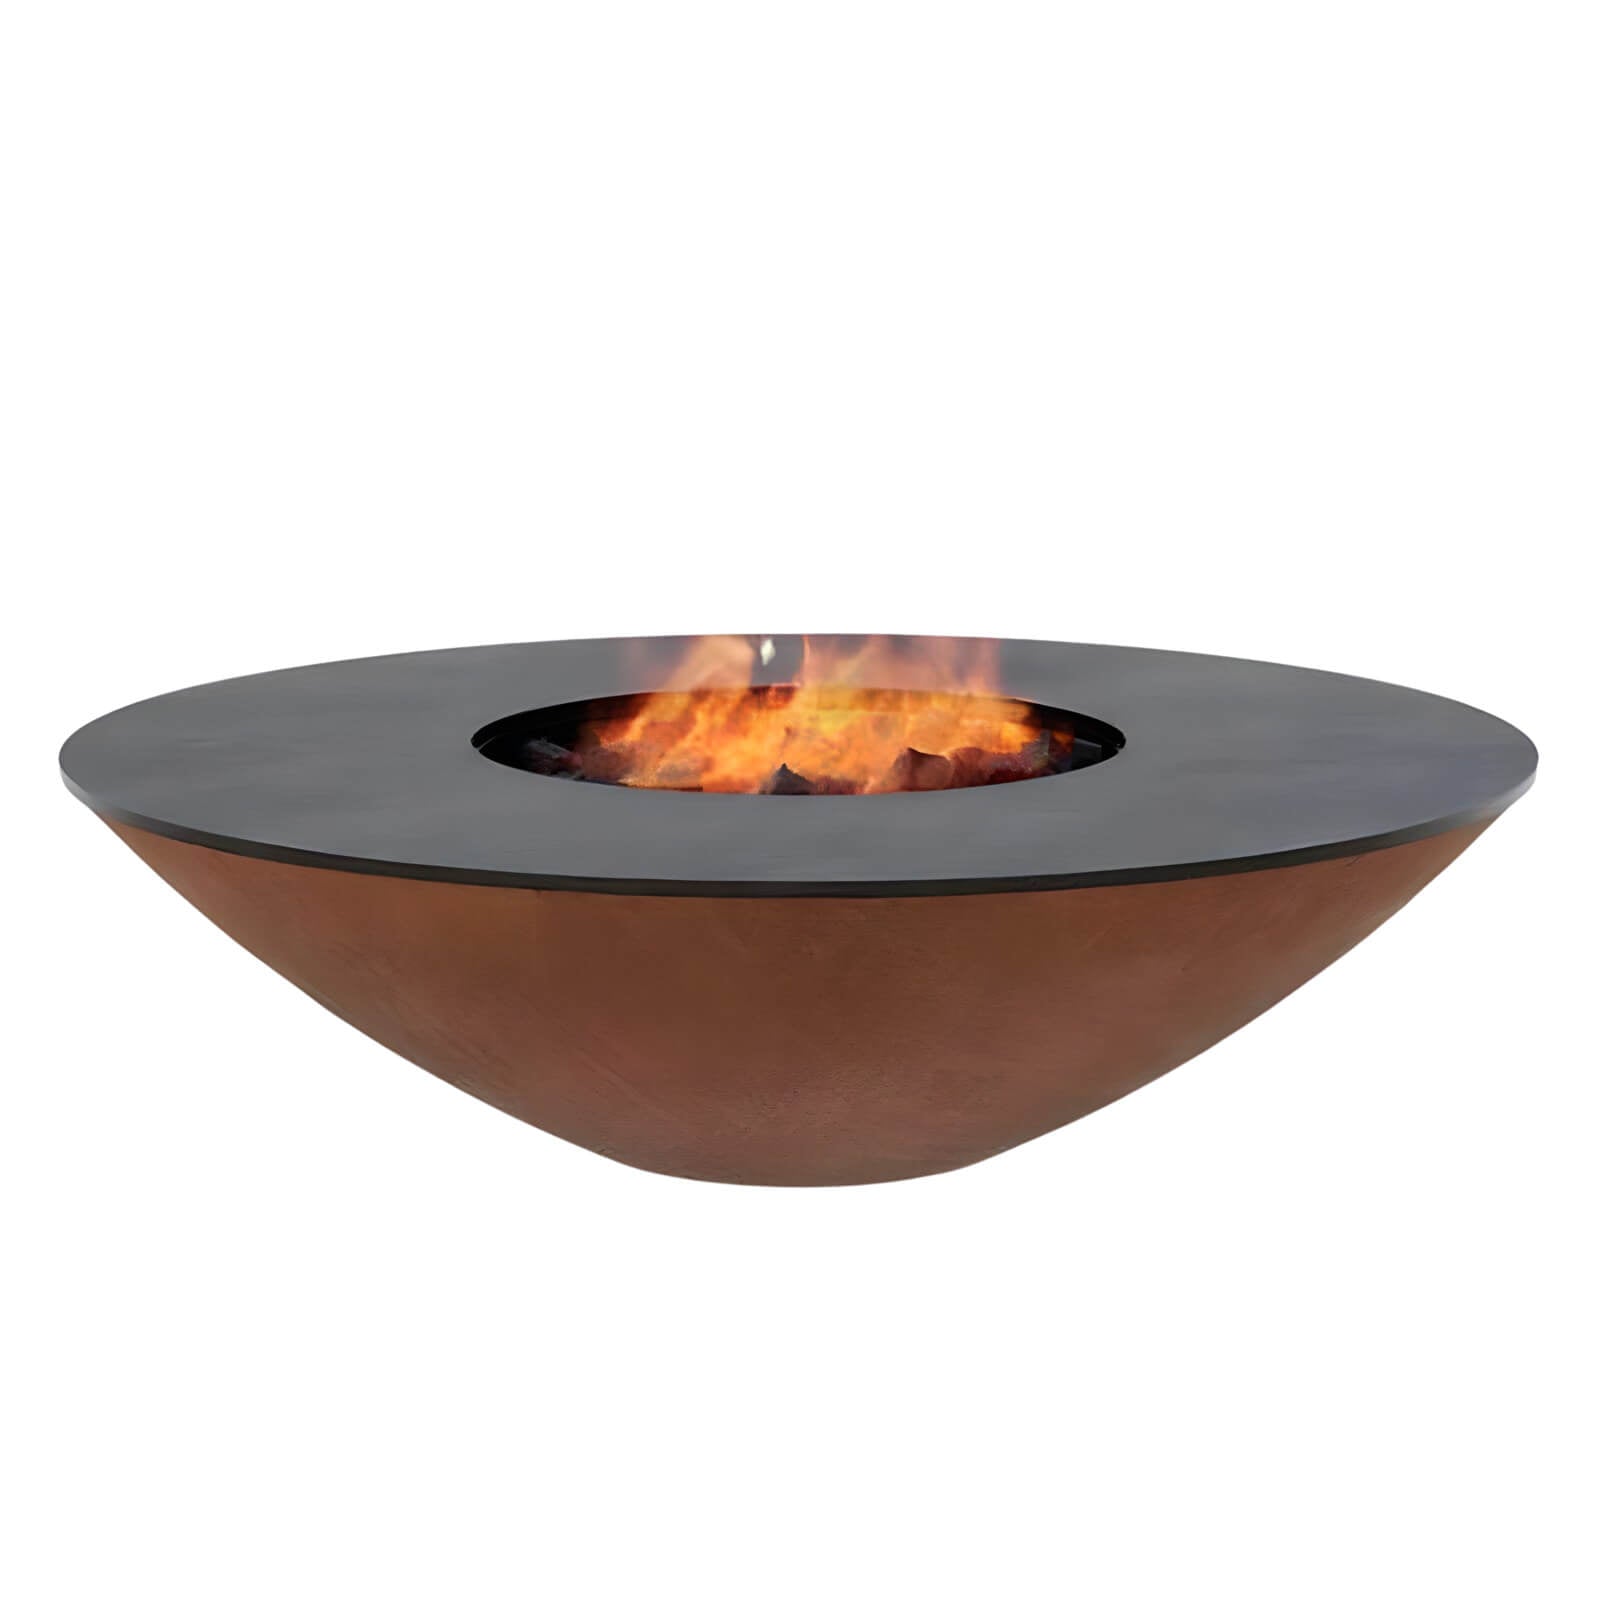 Arteflame 40 Inch Classic Fire Bowl Grill with Cooktop